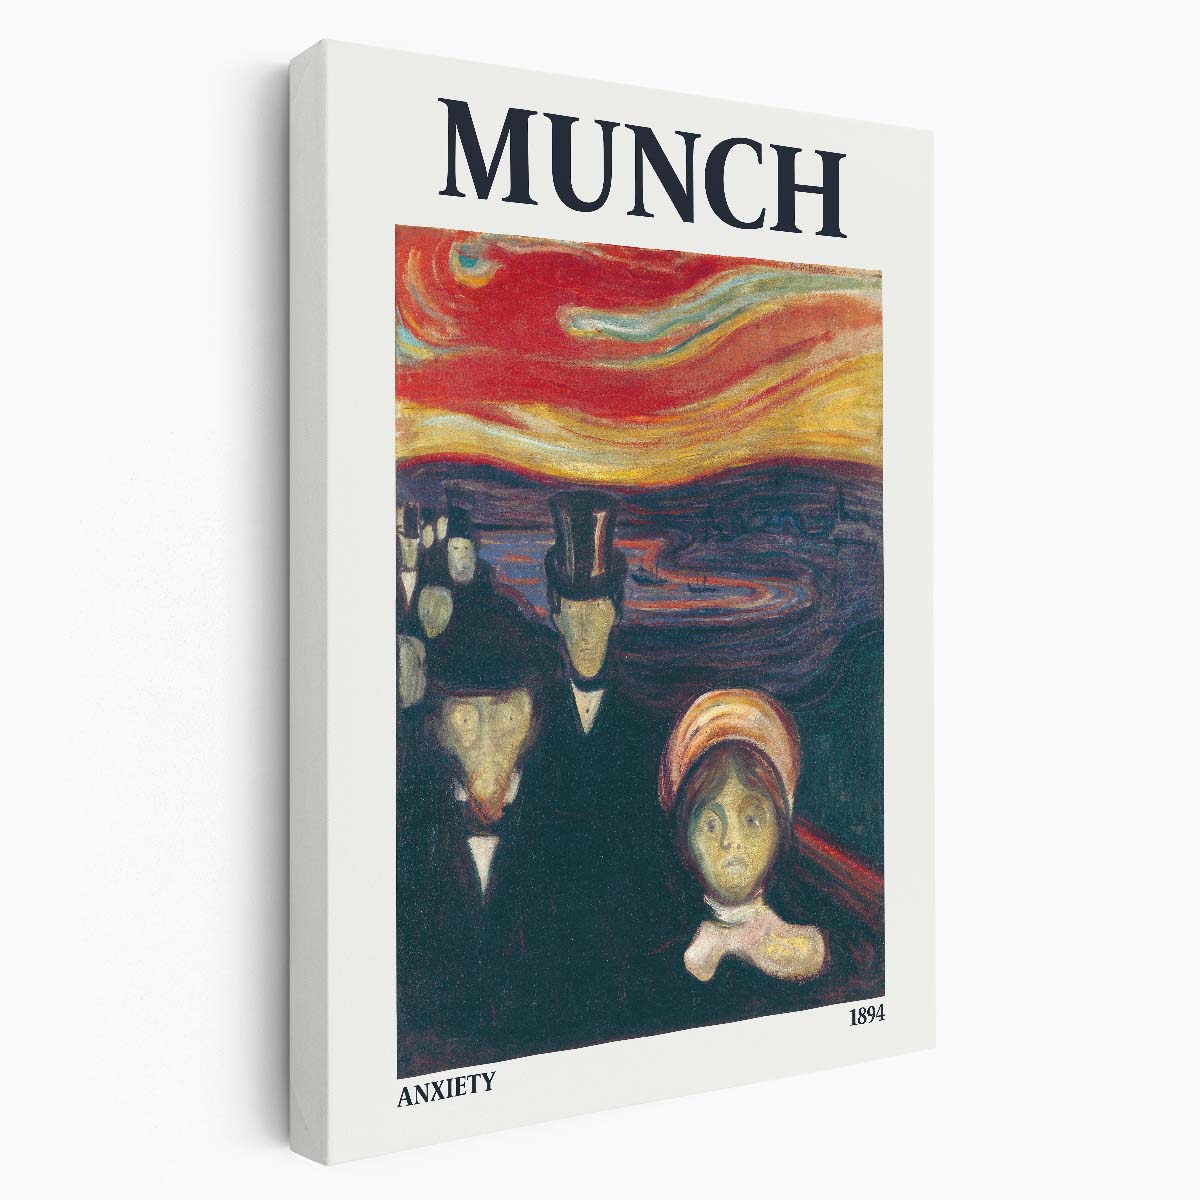 Edvard Munch Anxiety Acrylic Illustration Painting, 1894 Norway Masterpiece by Luxuriance Designs, made in USA